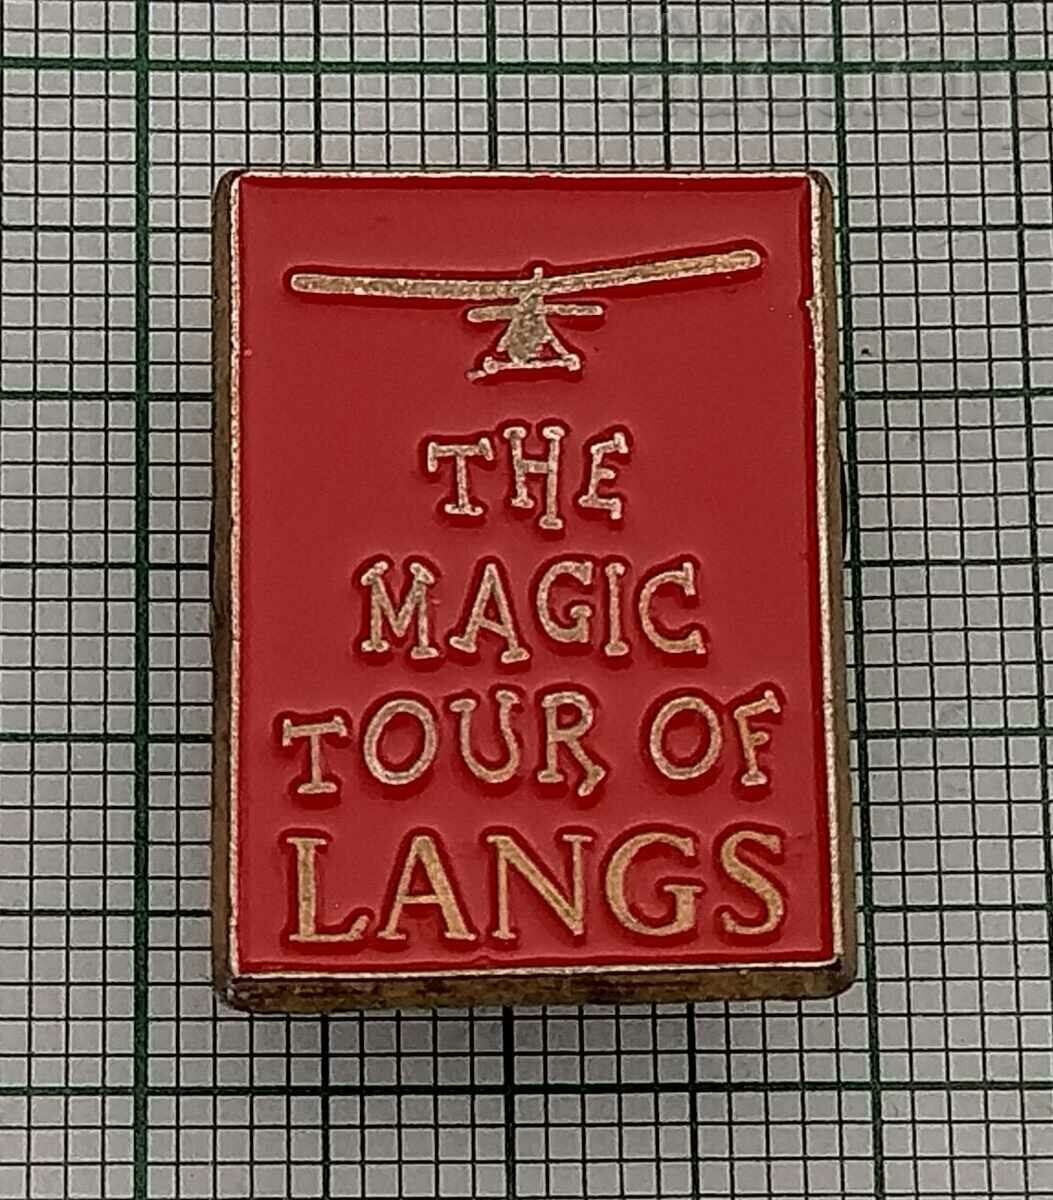 THE MAGIC TOUR OF LANGS УИСКИ ЗНАЧКА ПИН